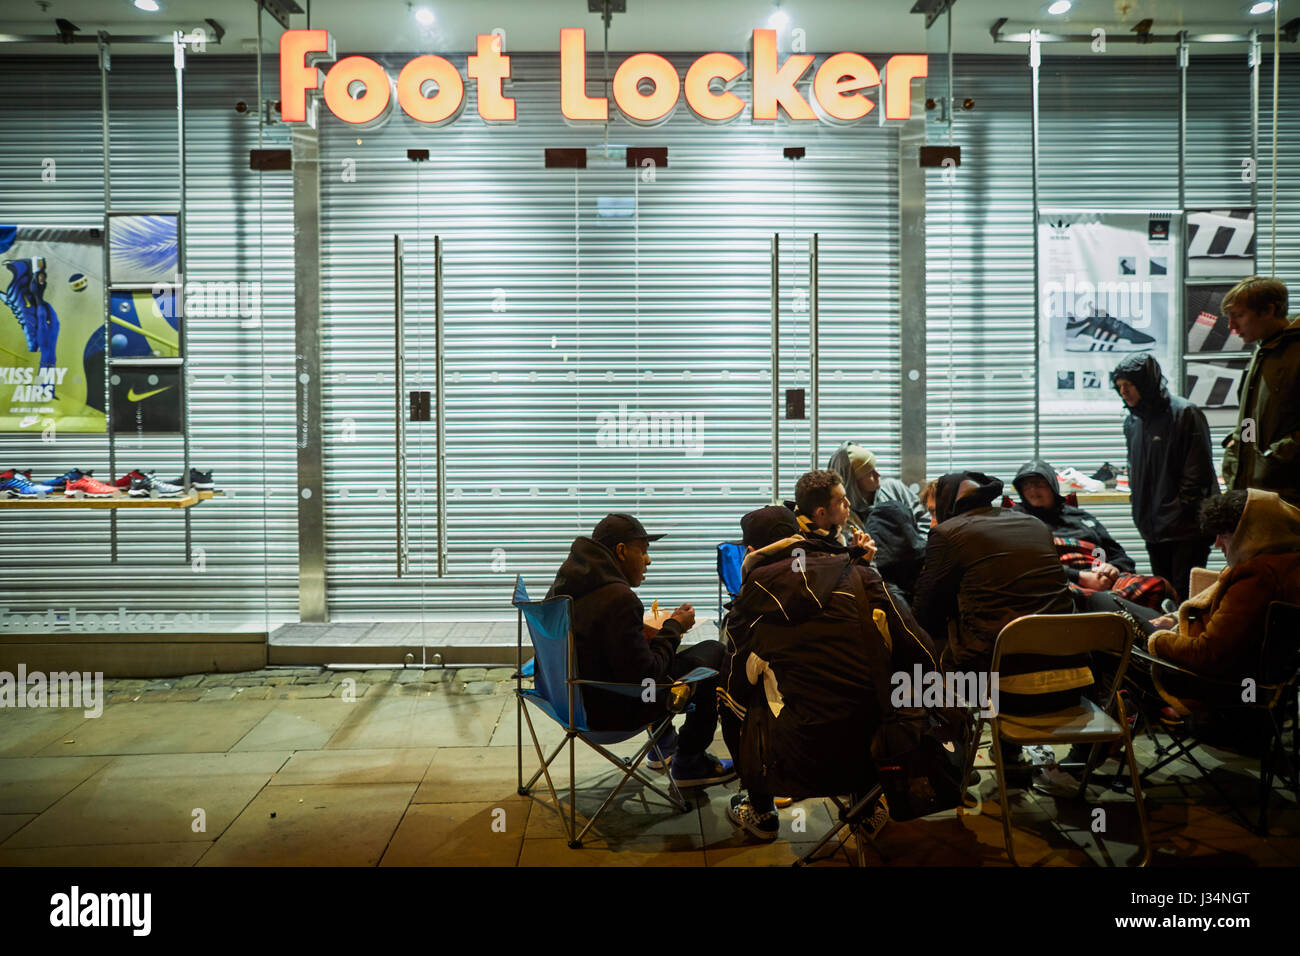 Footlocker High Resolution Stock Photography and Images - Alamy